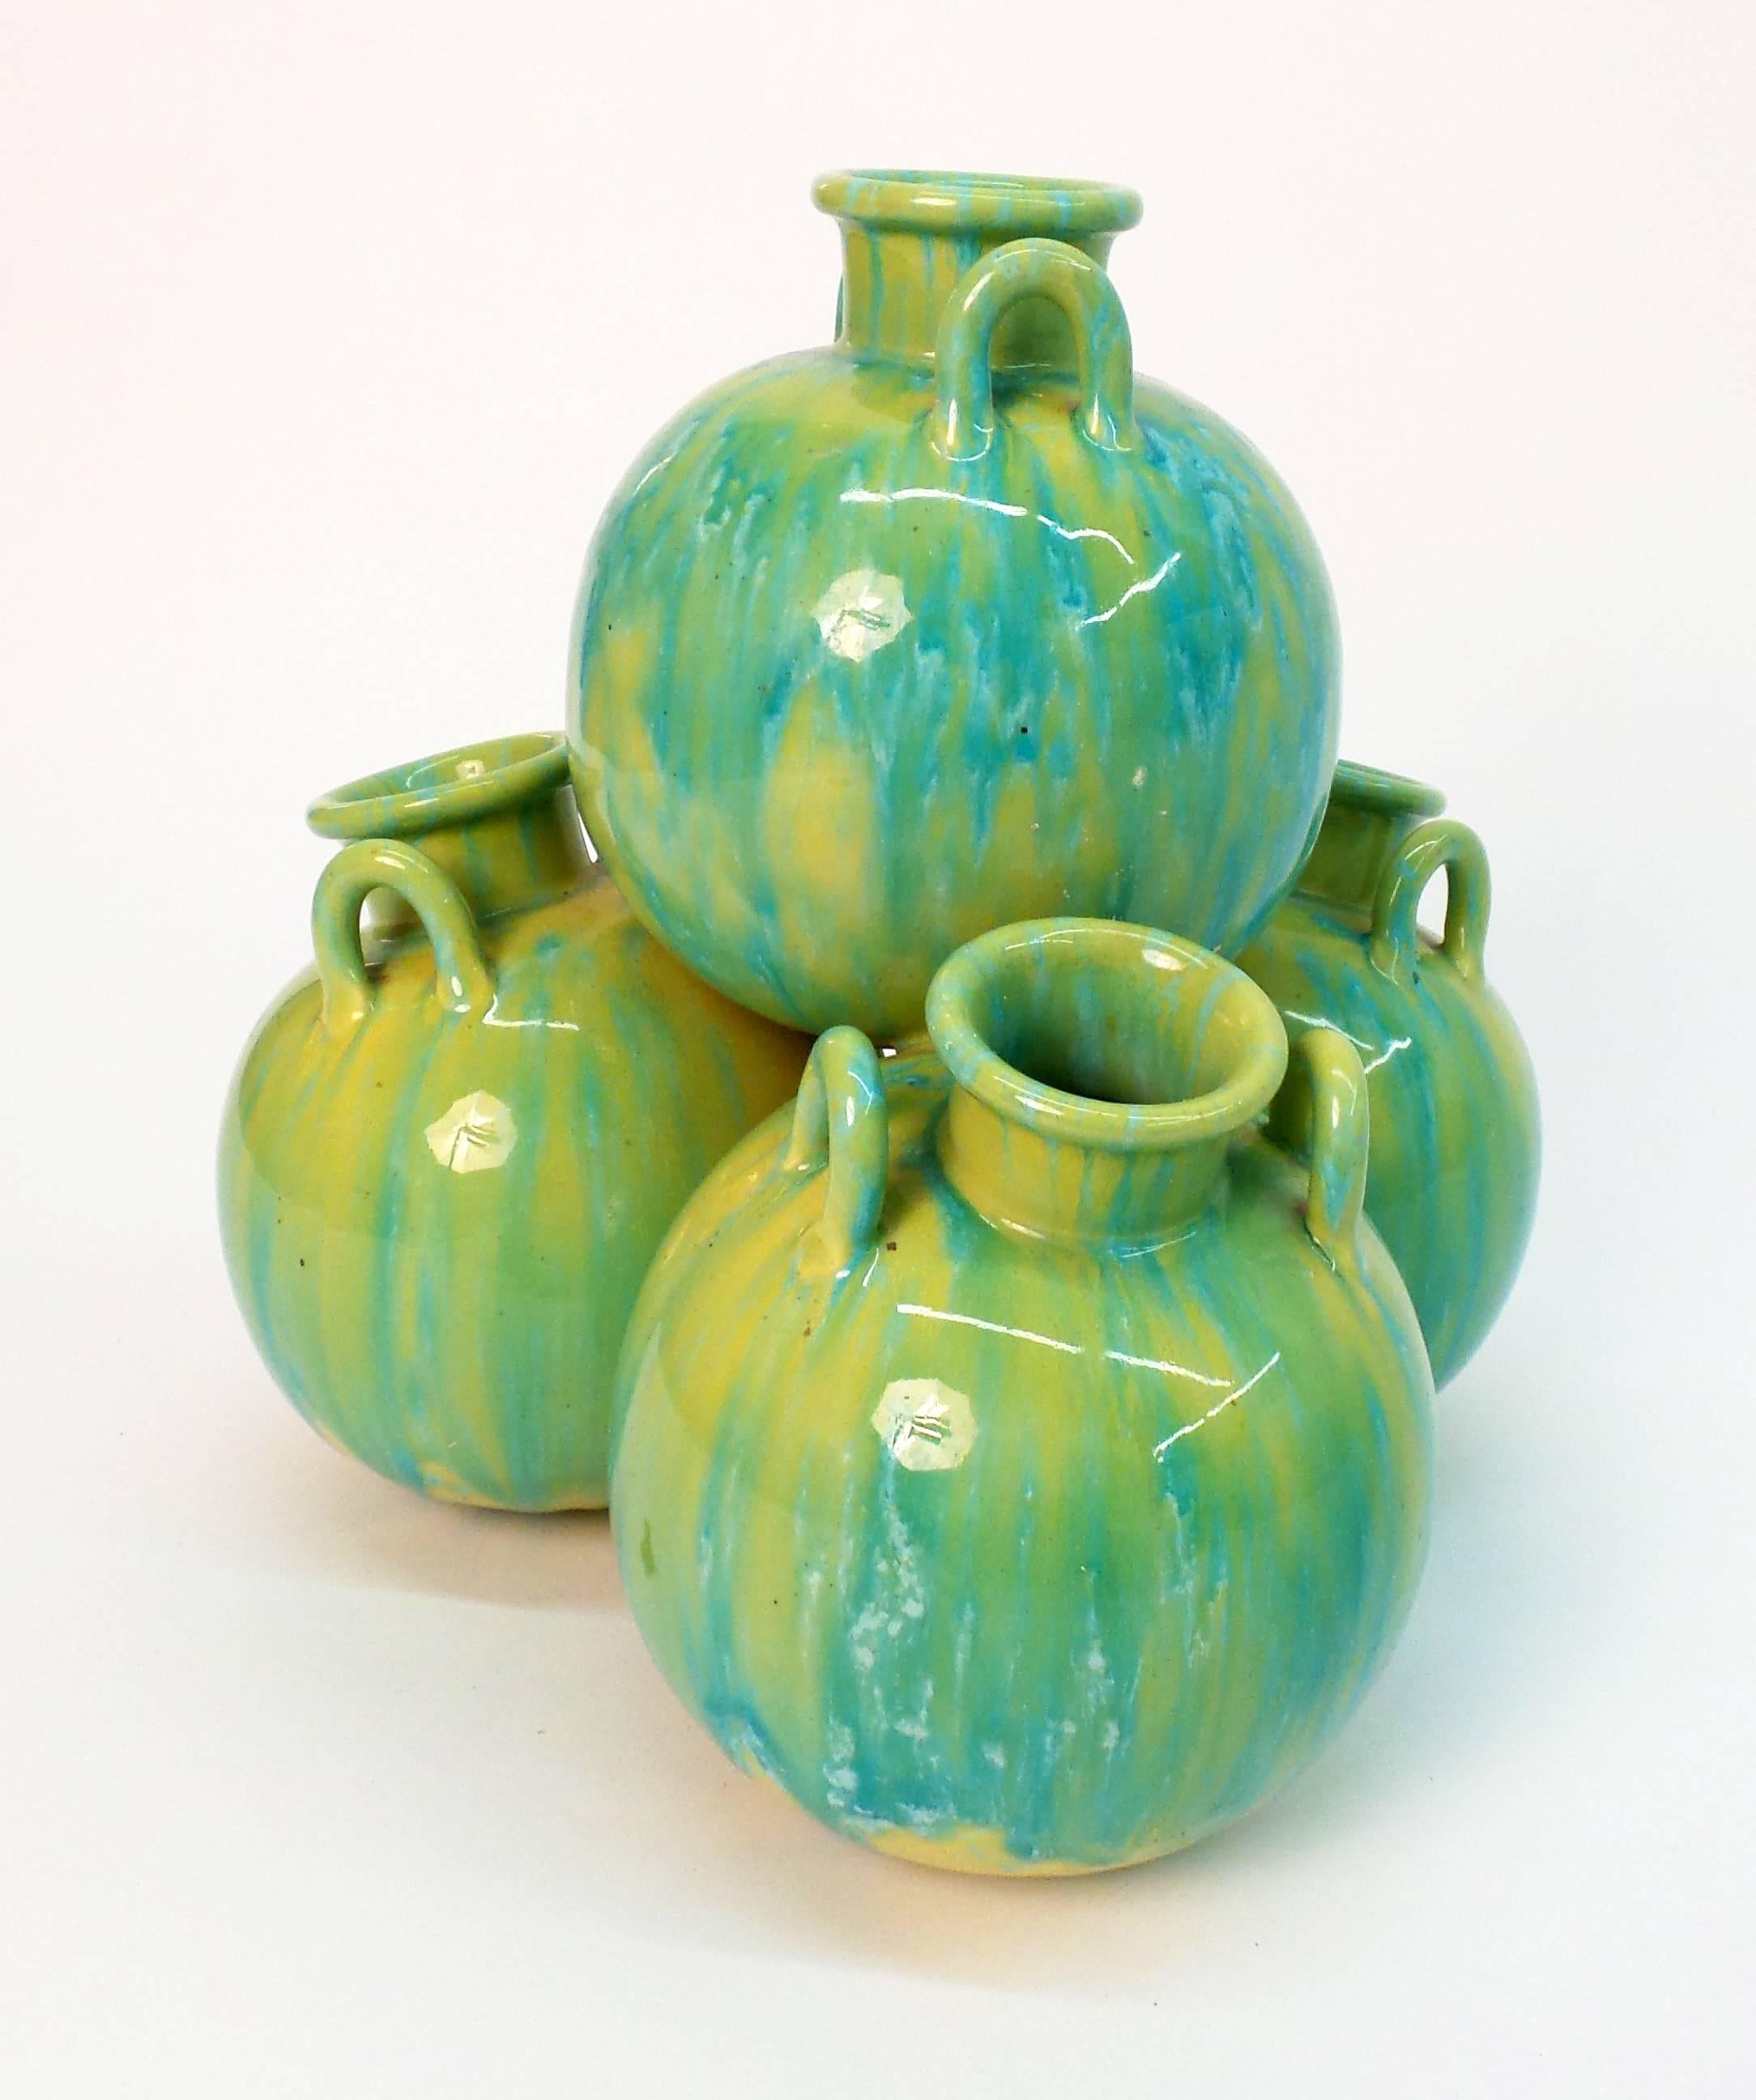 An unusual English Aesthetic period pottery vase of pyramidal form and based on a model by Minton's, composed by a stack of four melon form vases with handles, circa 1895.